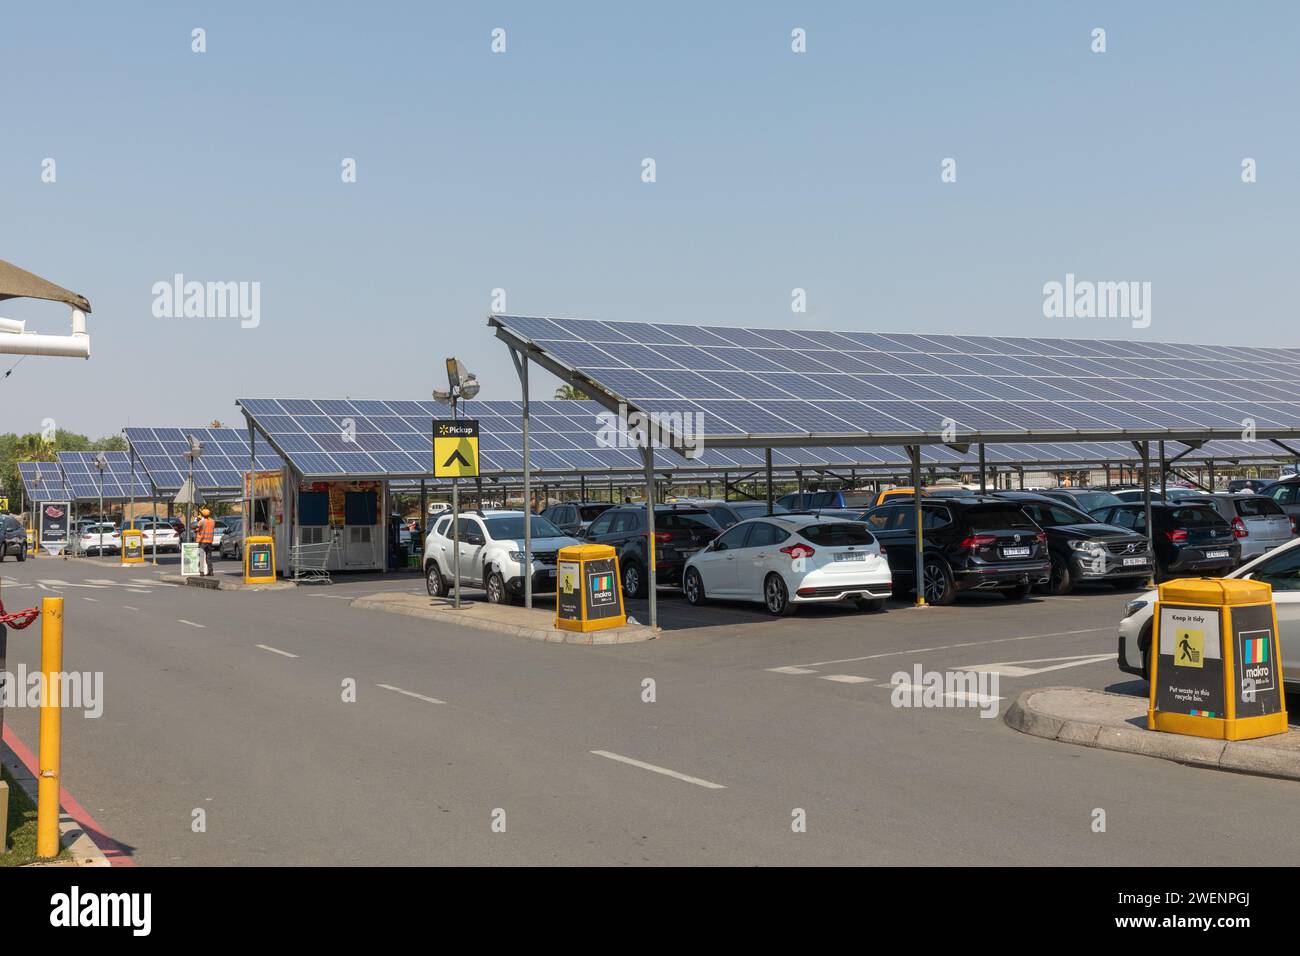 Sandton, South Africa   Oct. 8, 2023: Solar panels are seen at a big-box store parking lot in northern Johannesburg. The panels alleviate the problems Stock Photo